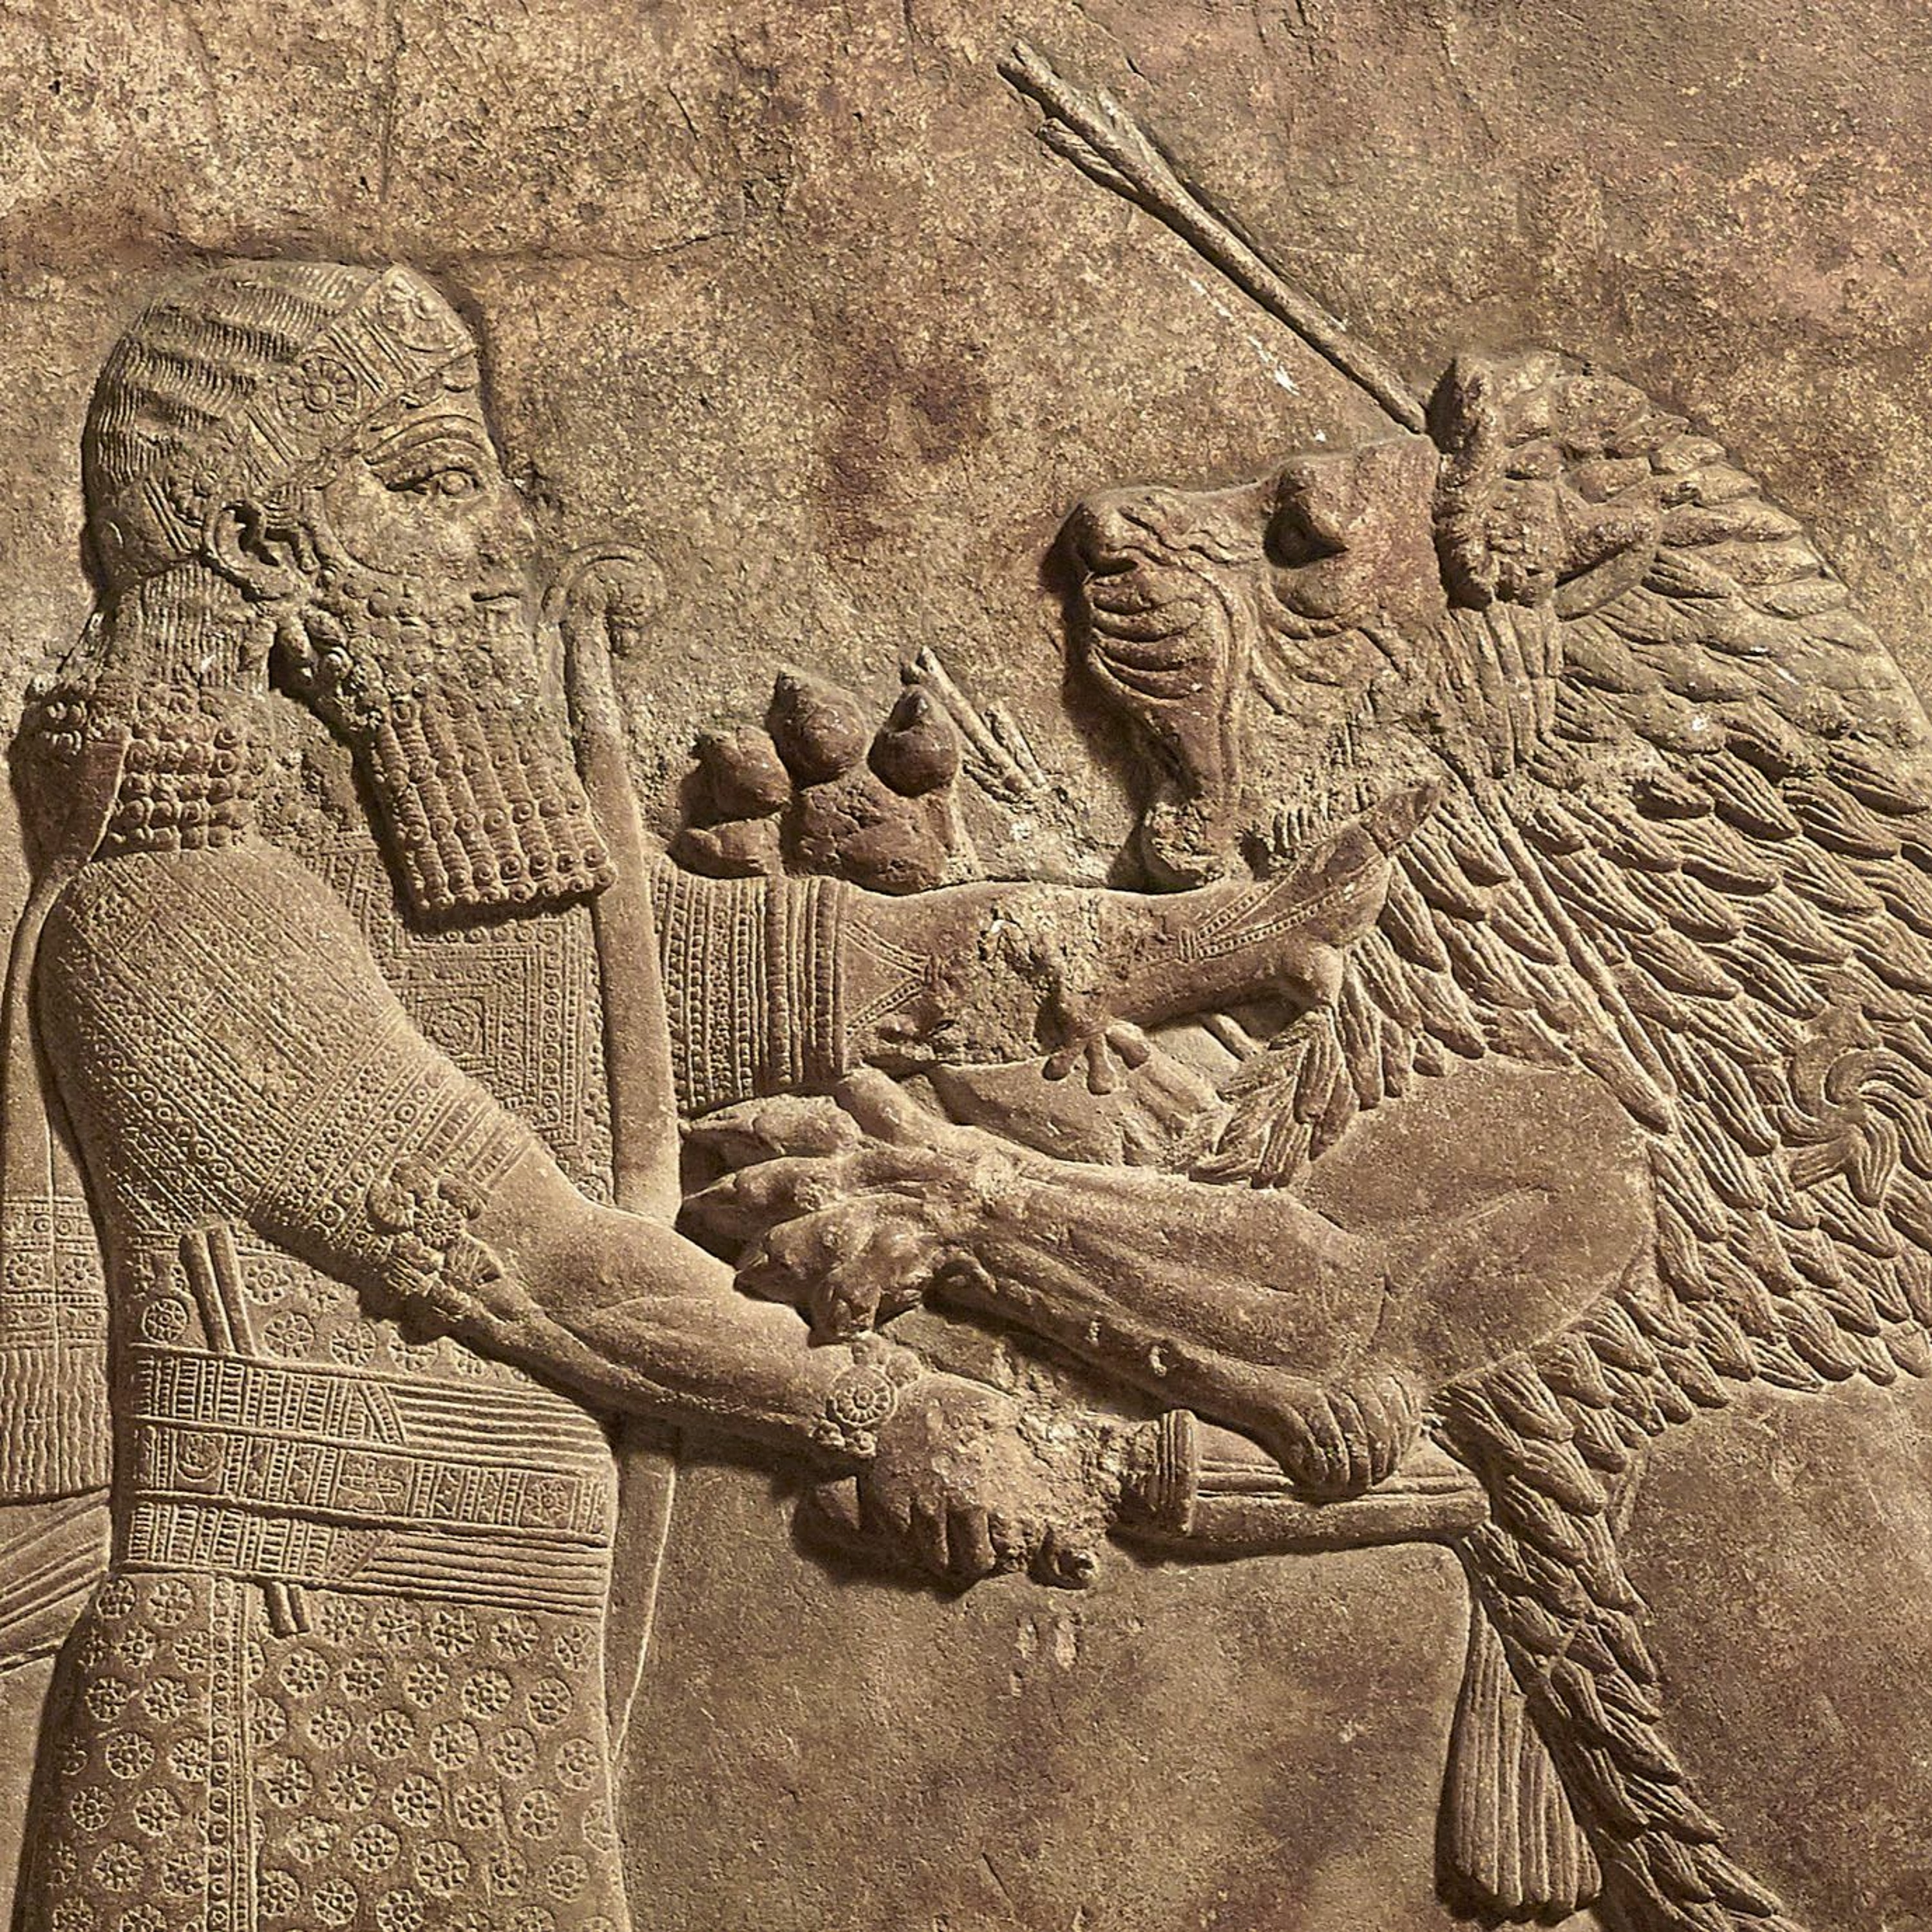 UNLOCKED: The Great Archaeological Discoveries, pt. 4 -- The Library of Ashurbanipal